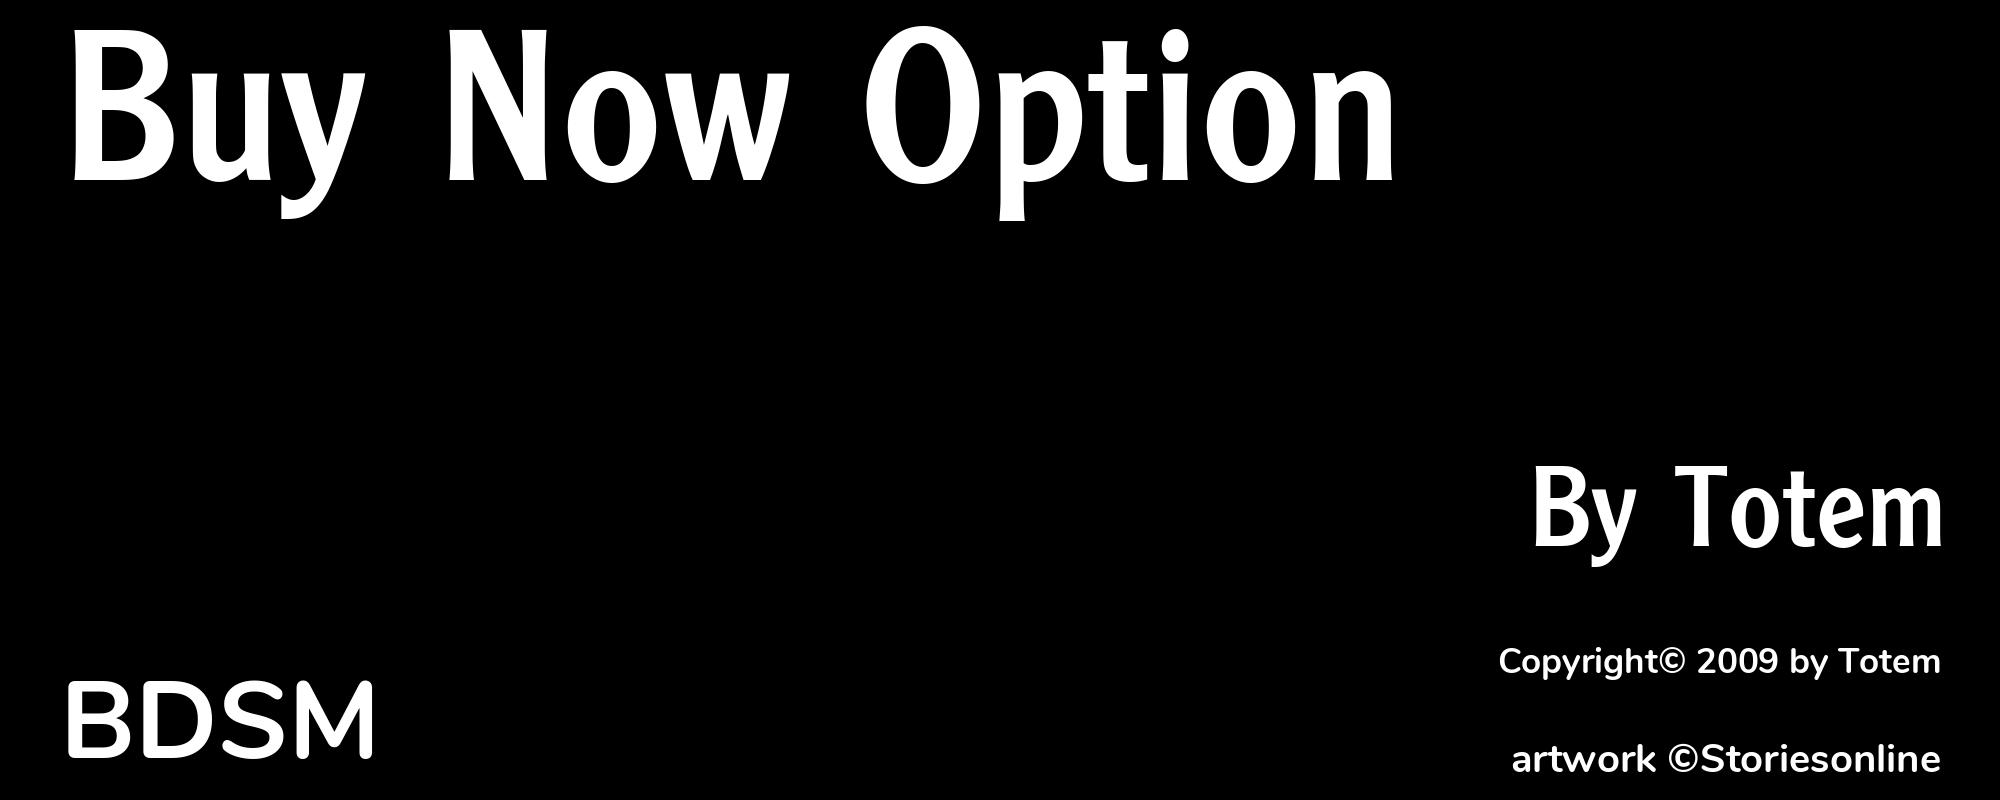 Buy Now Option - Cover